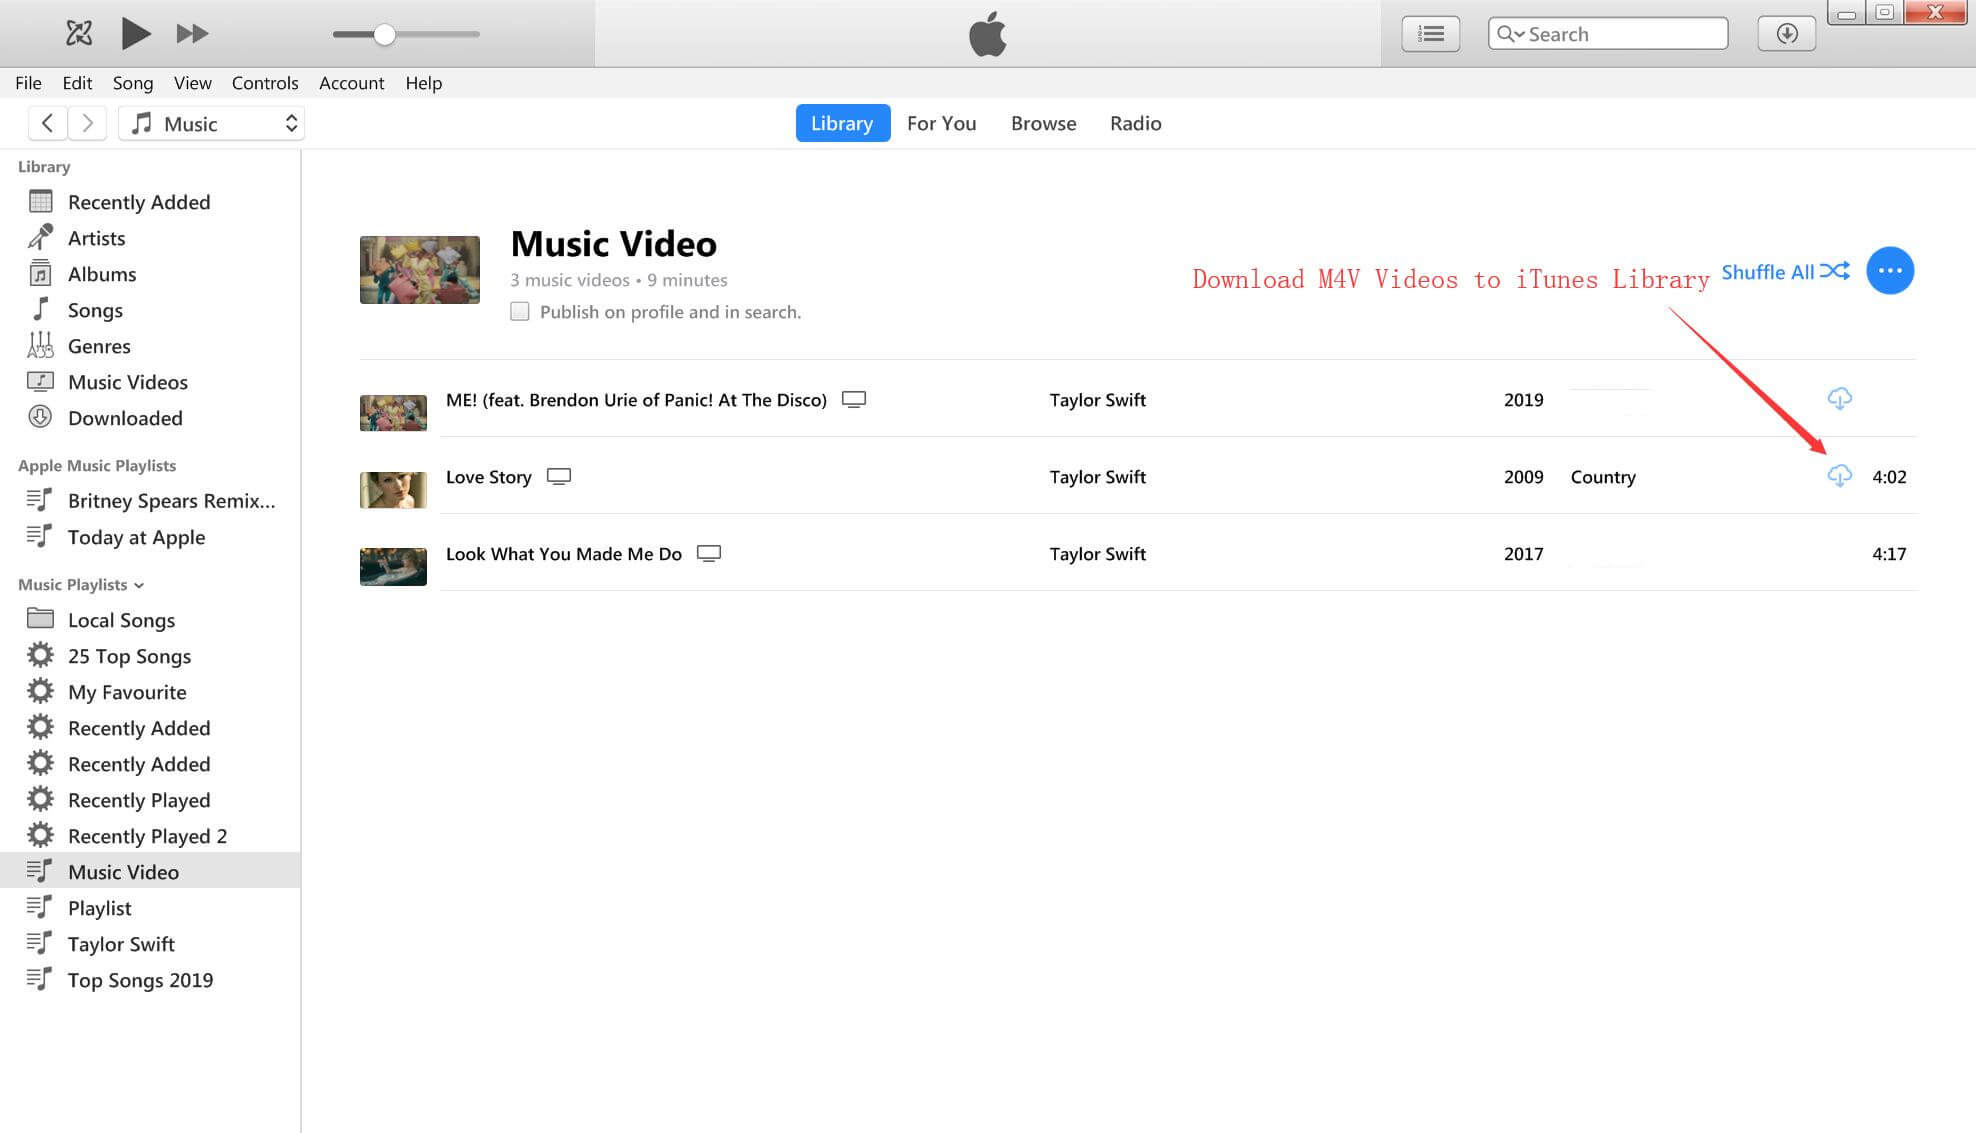 Download iTunes Videos to Library